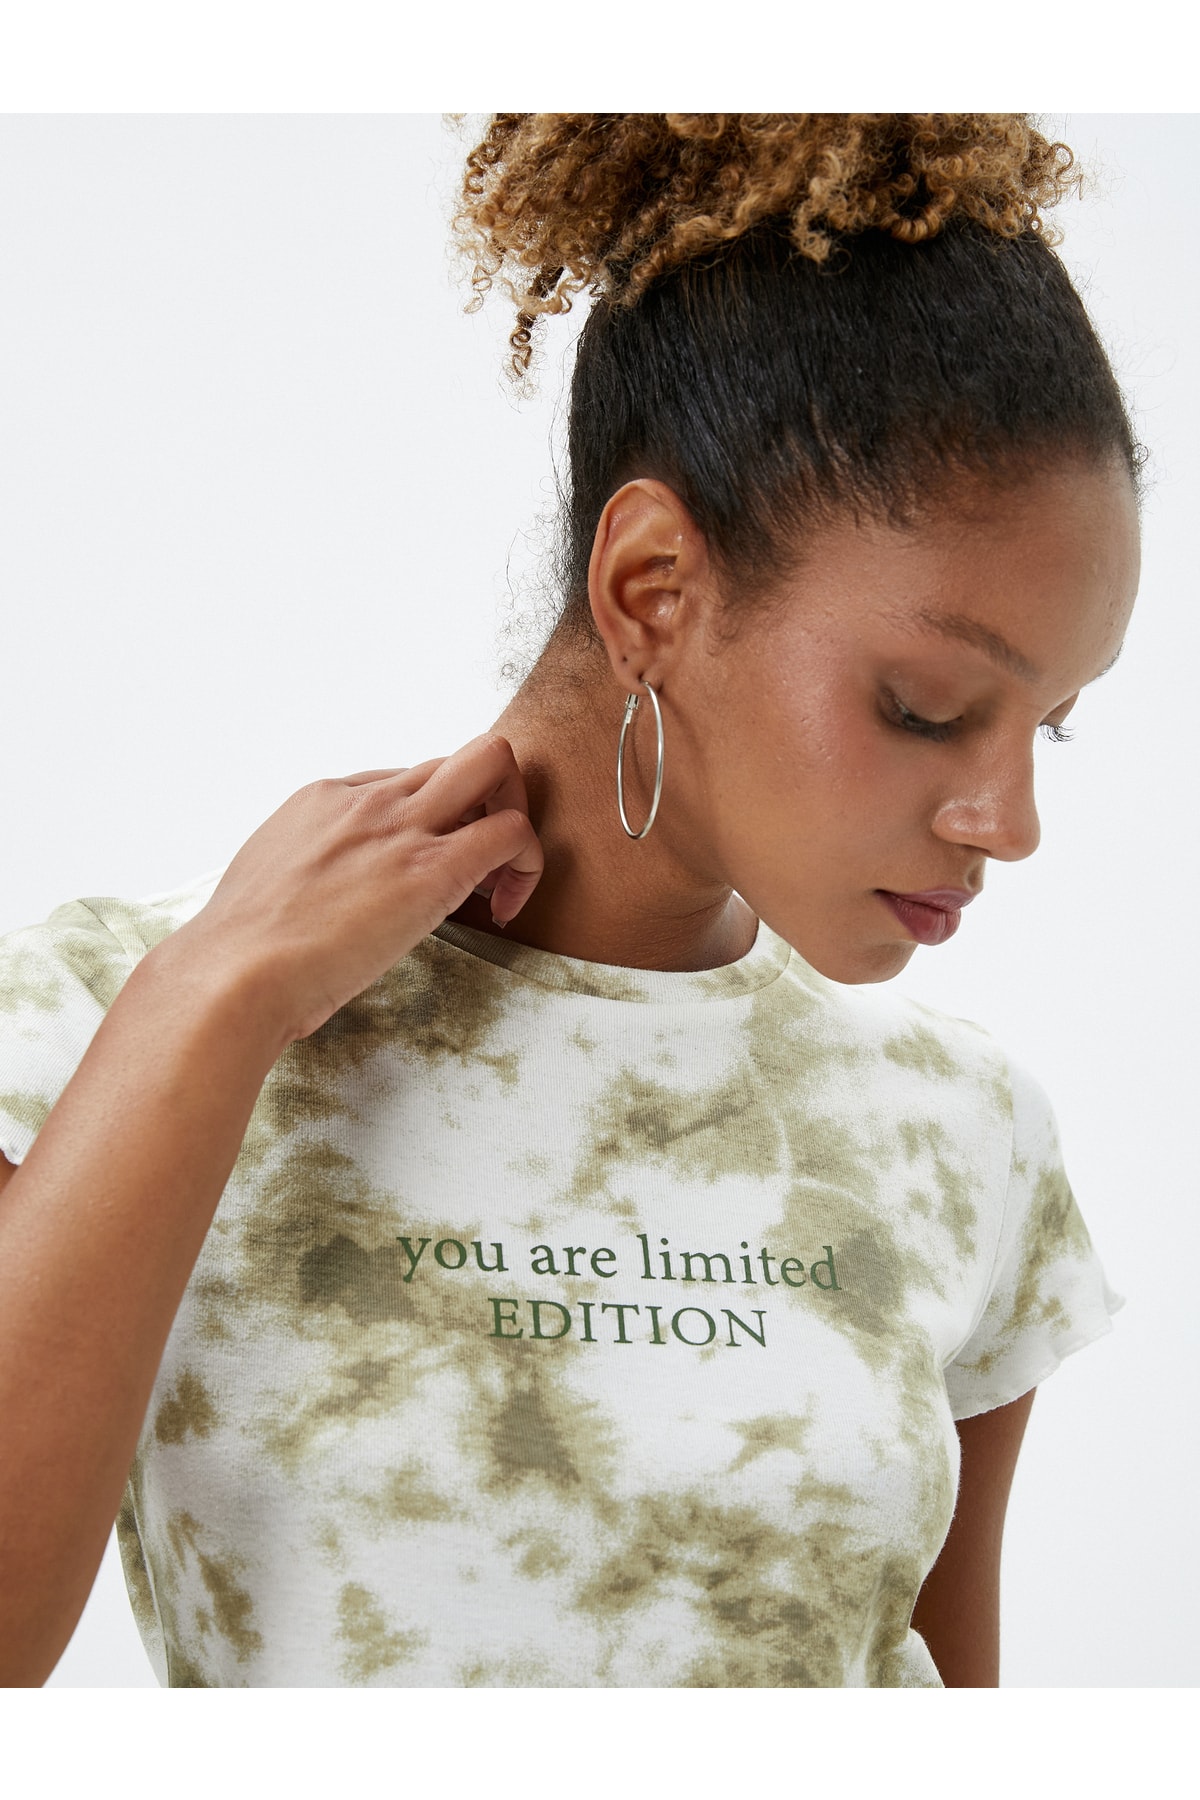 Koton T-Shirt with a slogan Printed Tie-Dye Detailed Short Sleeve Crew Neck.